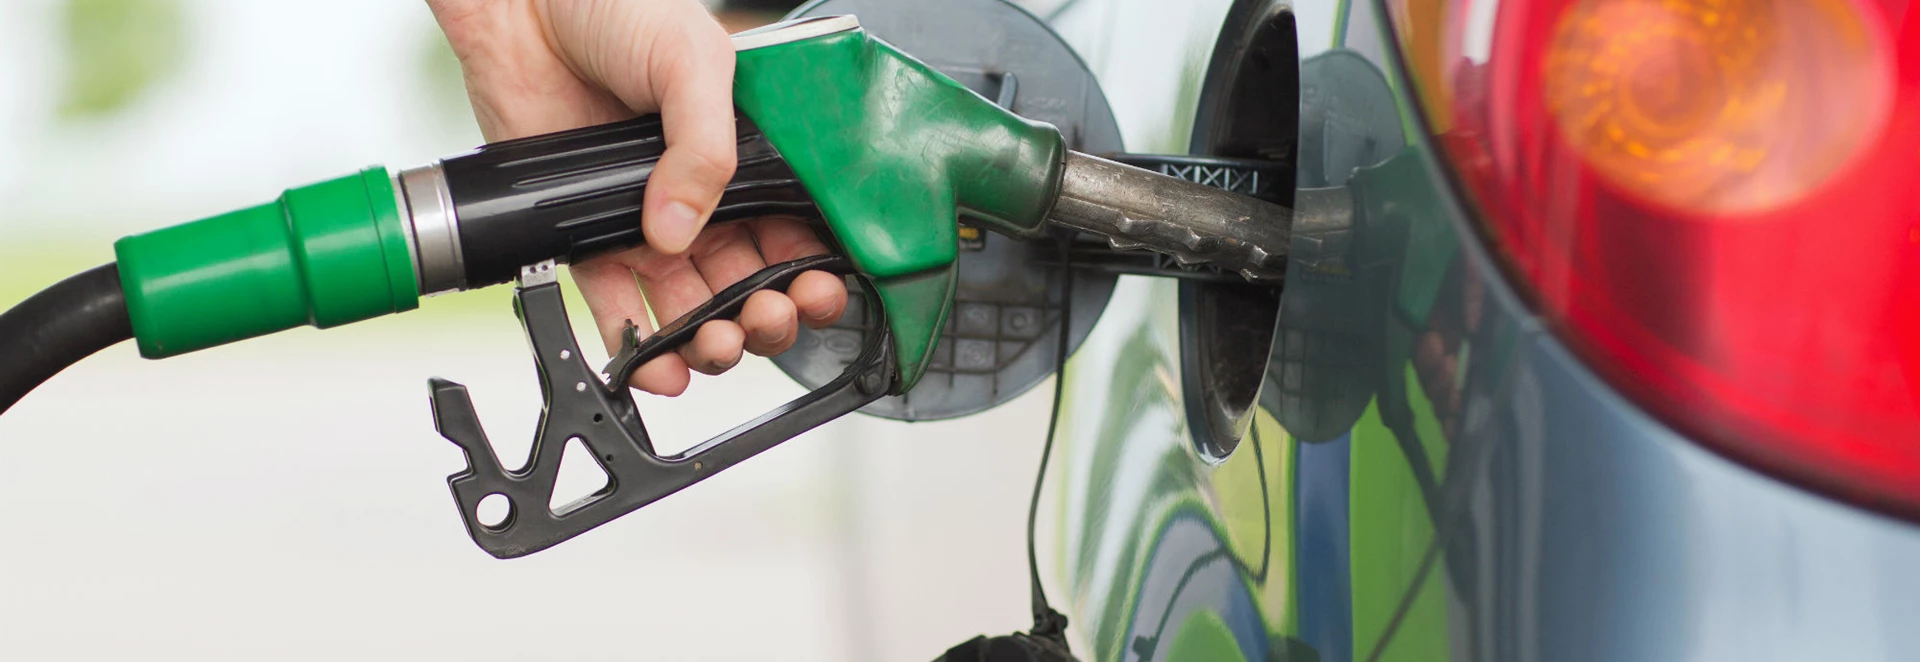 Five myths about fuel economy debunked 